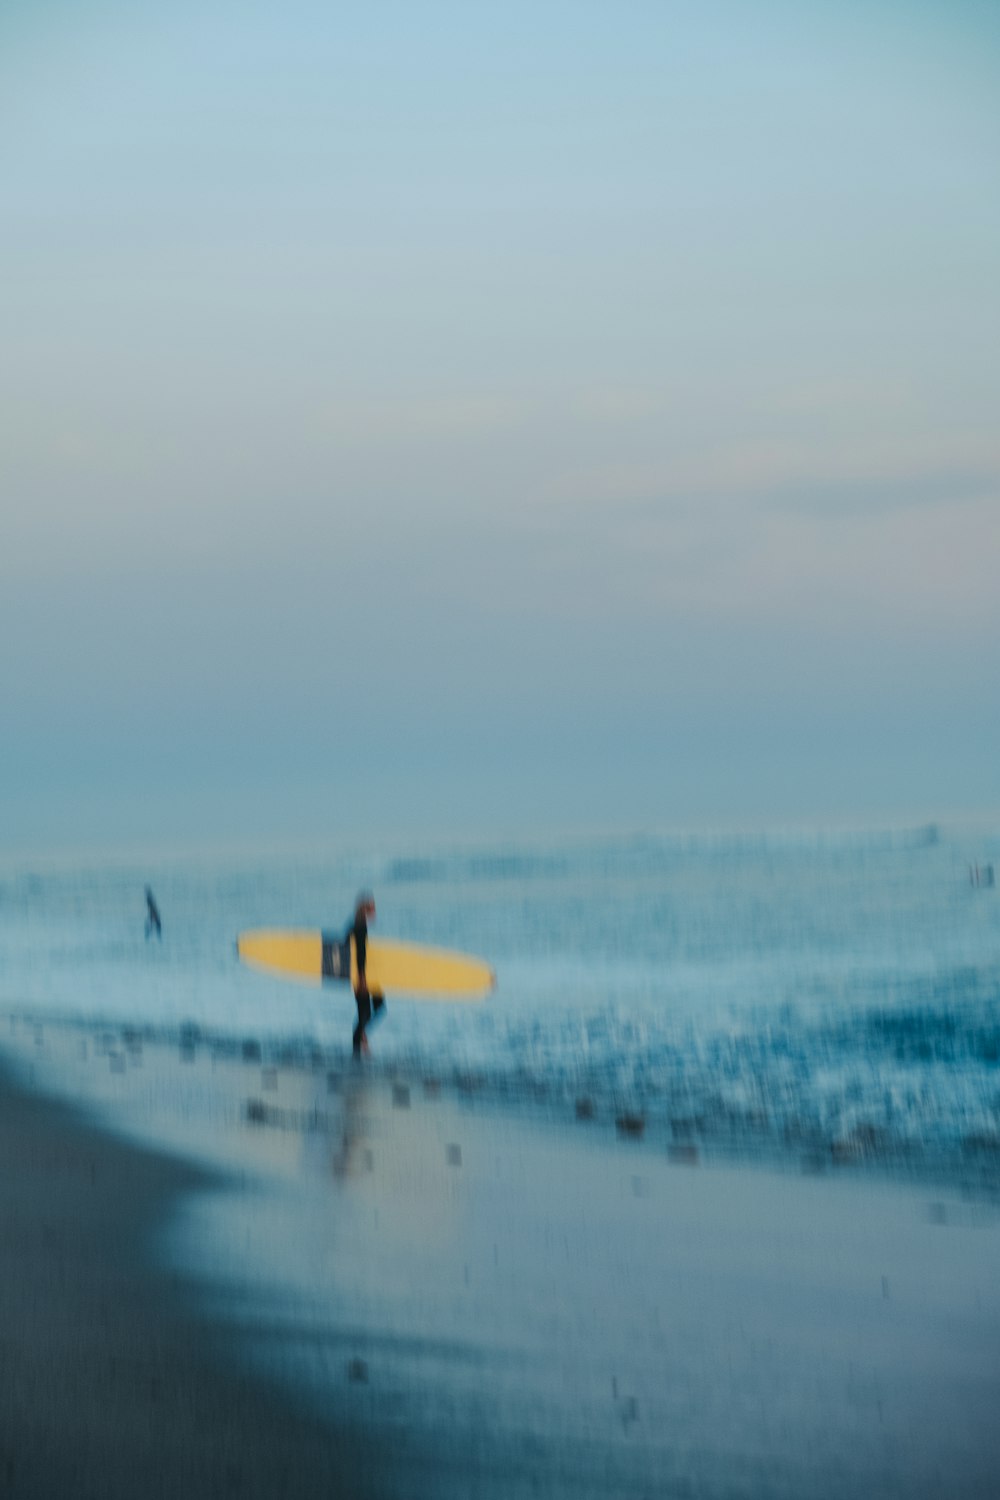 a blurry photo of a person carrying a surfboard